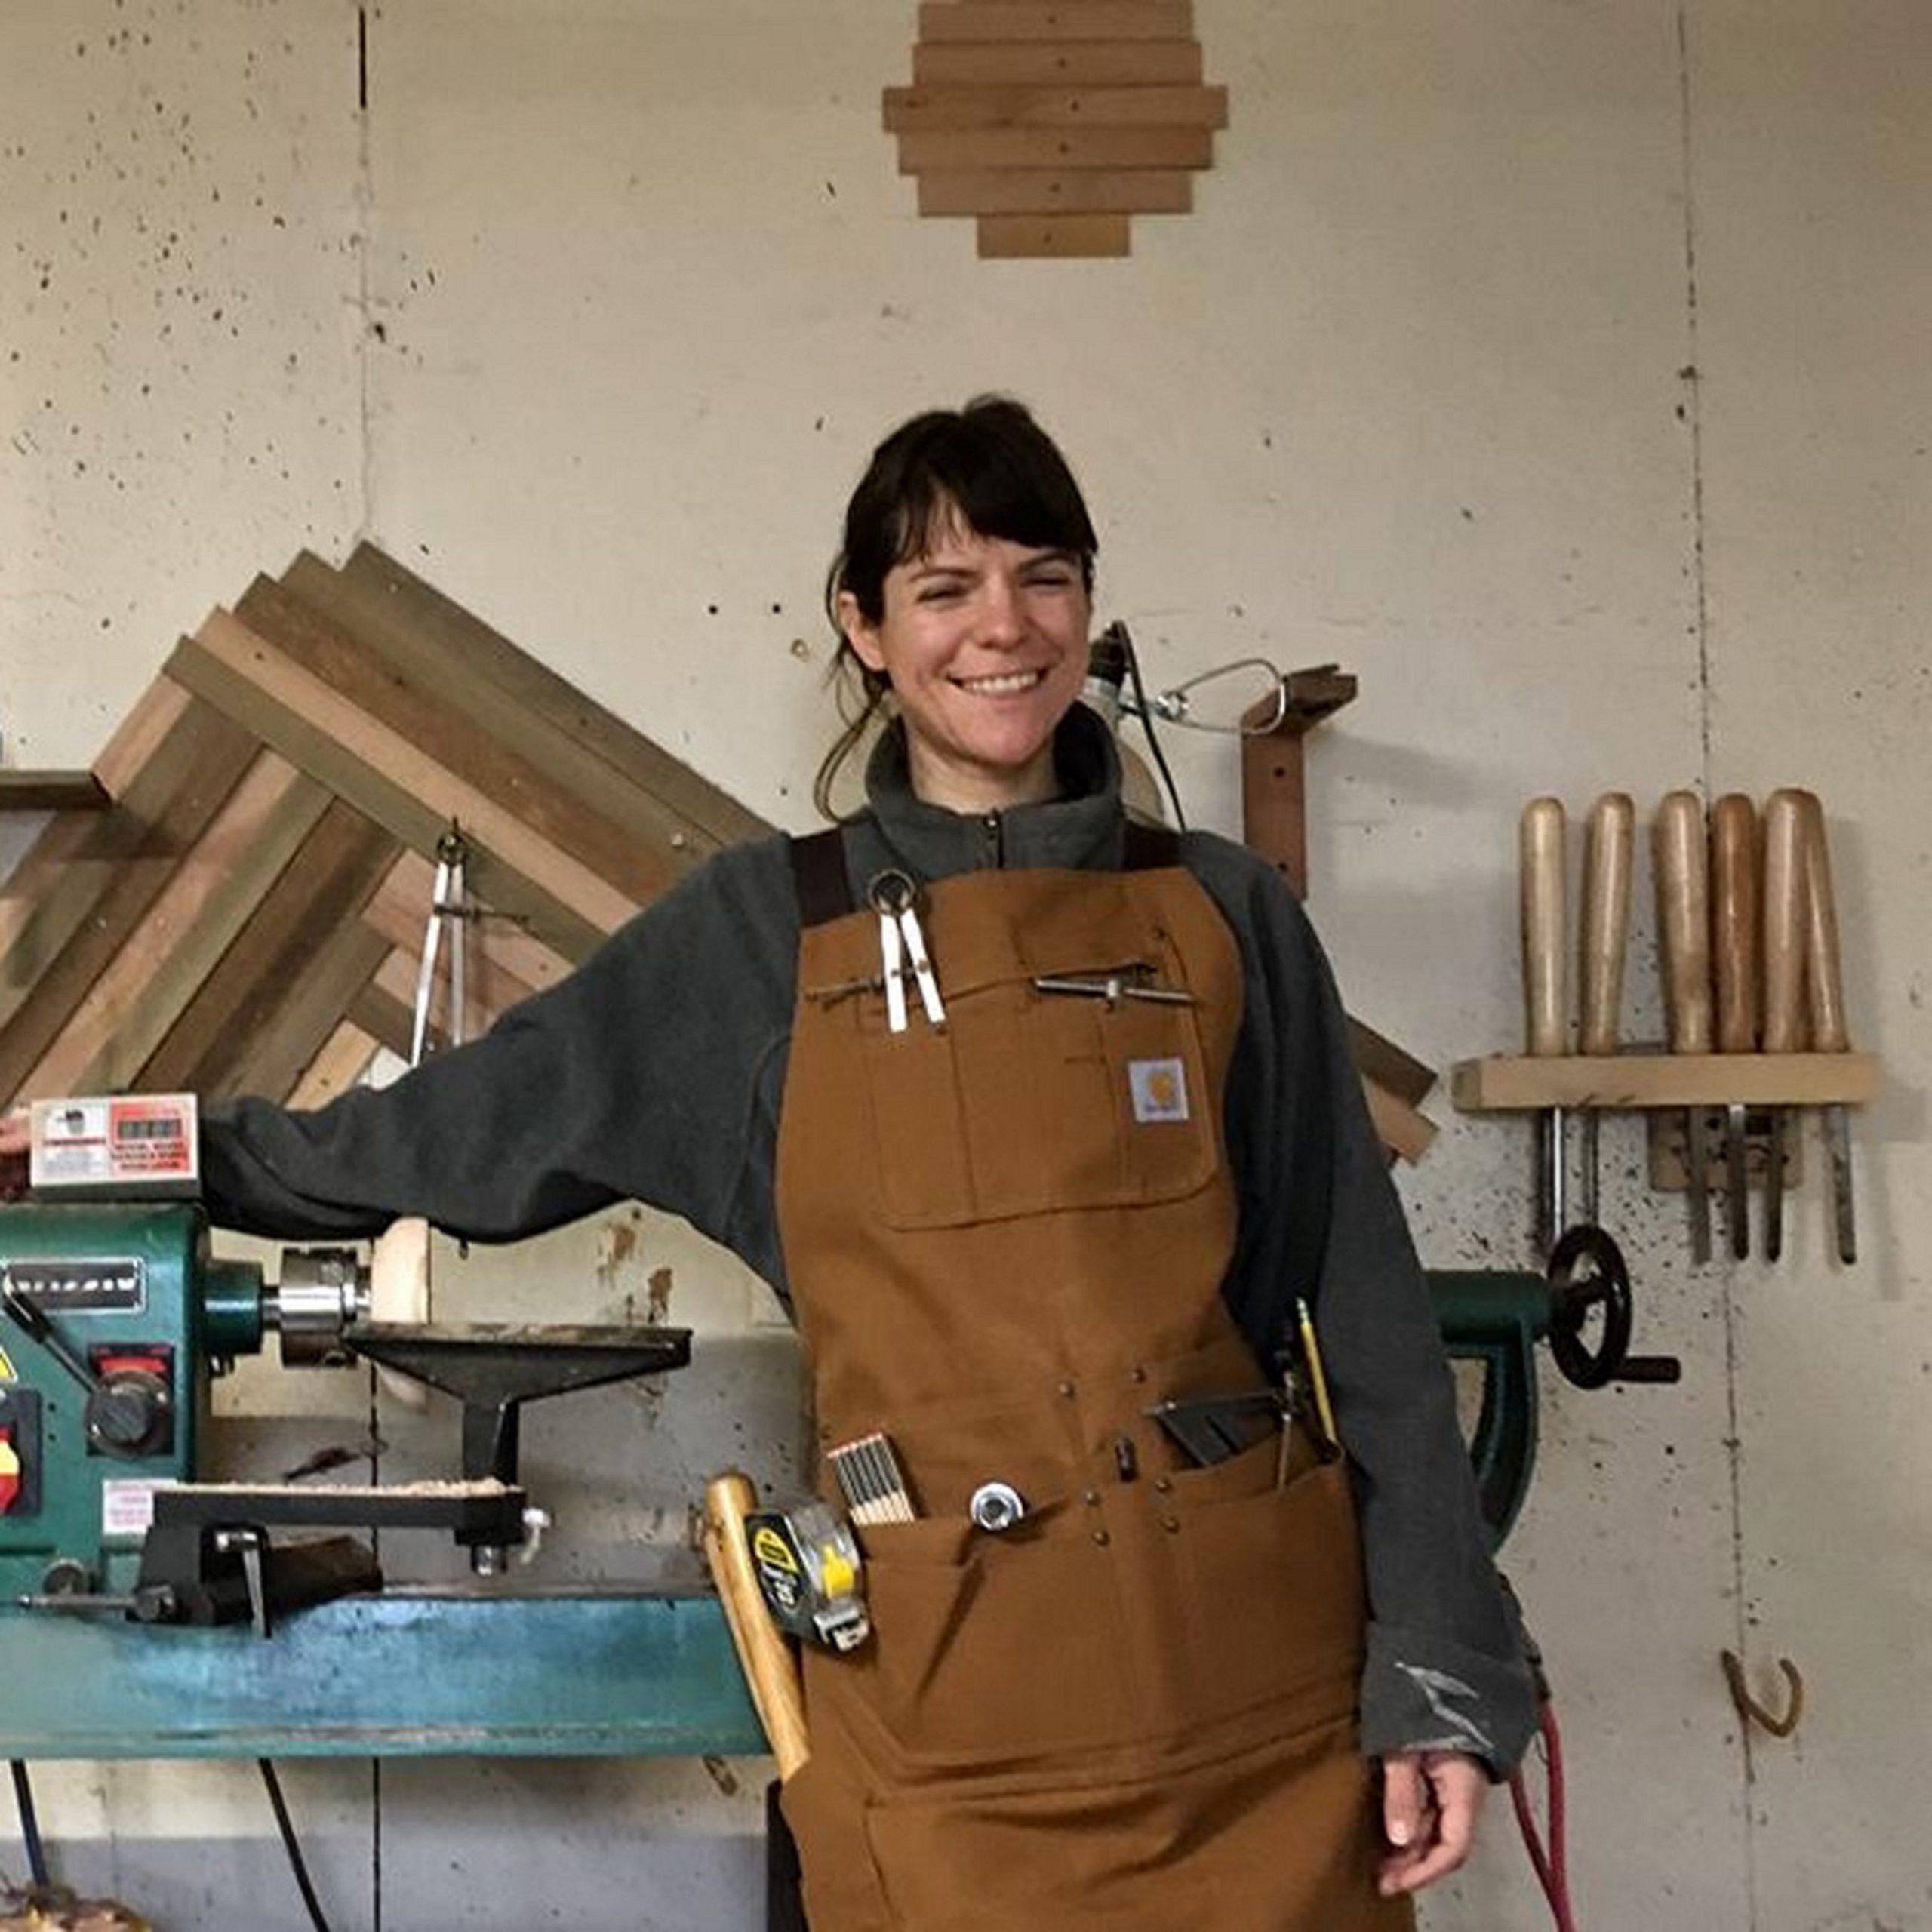 Maker of the Month: Surcle Wood - PATTERN